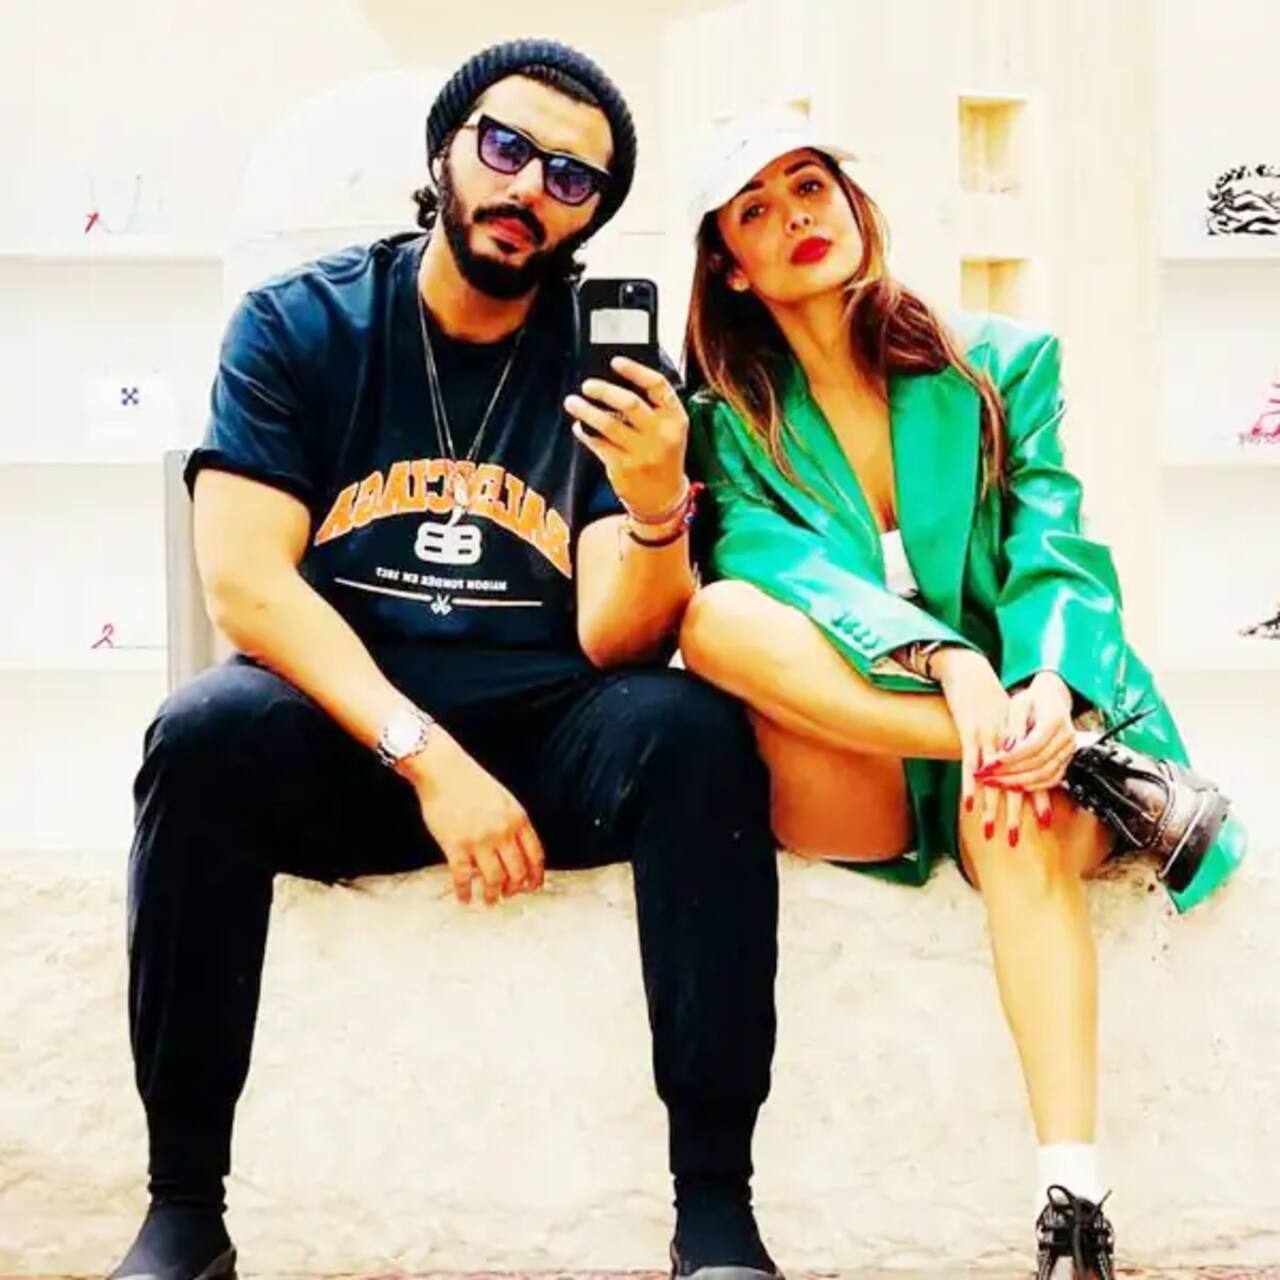 Malaika Arora and Arjun Kapoor are deeply and madly in love with each other